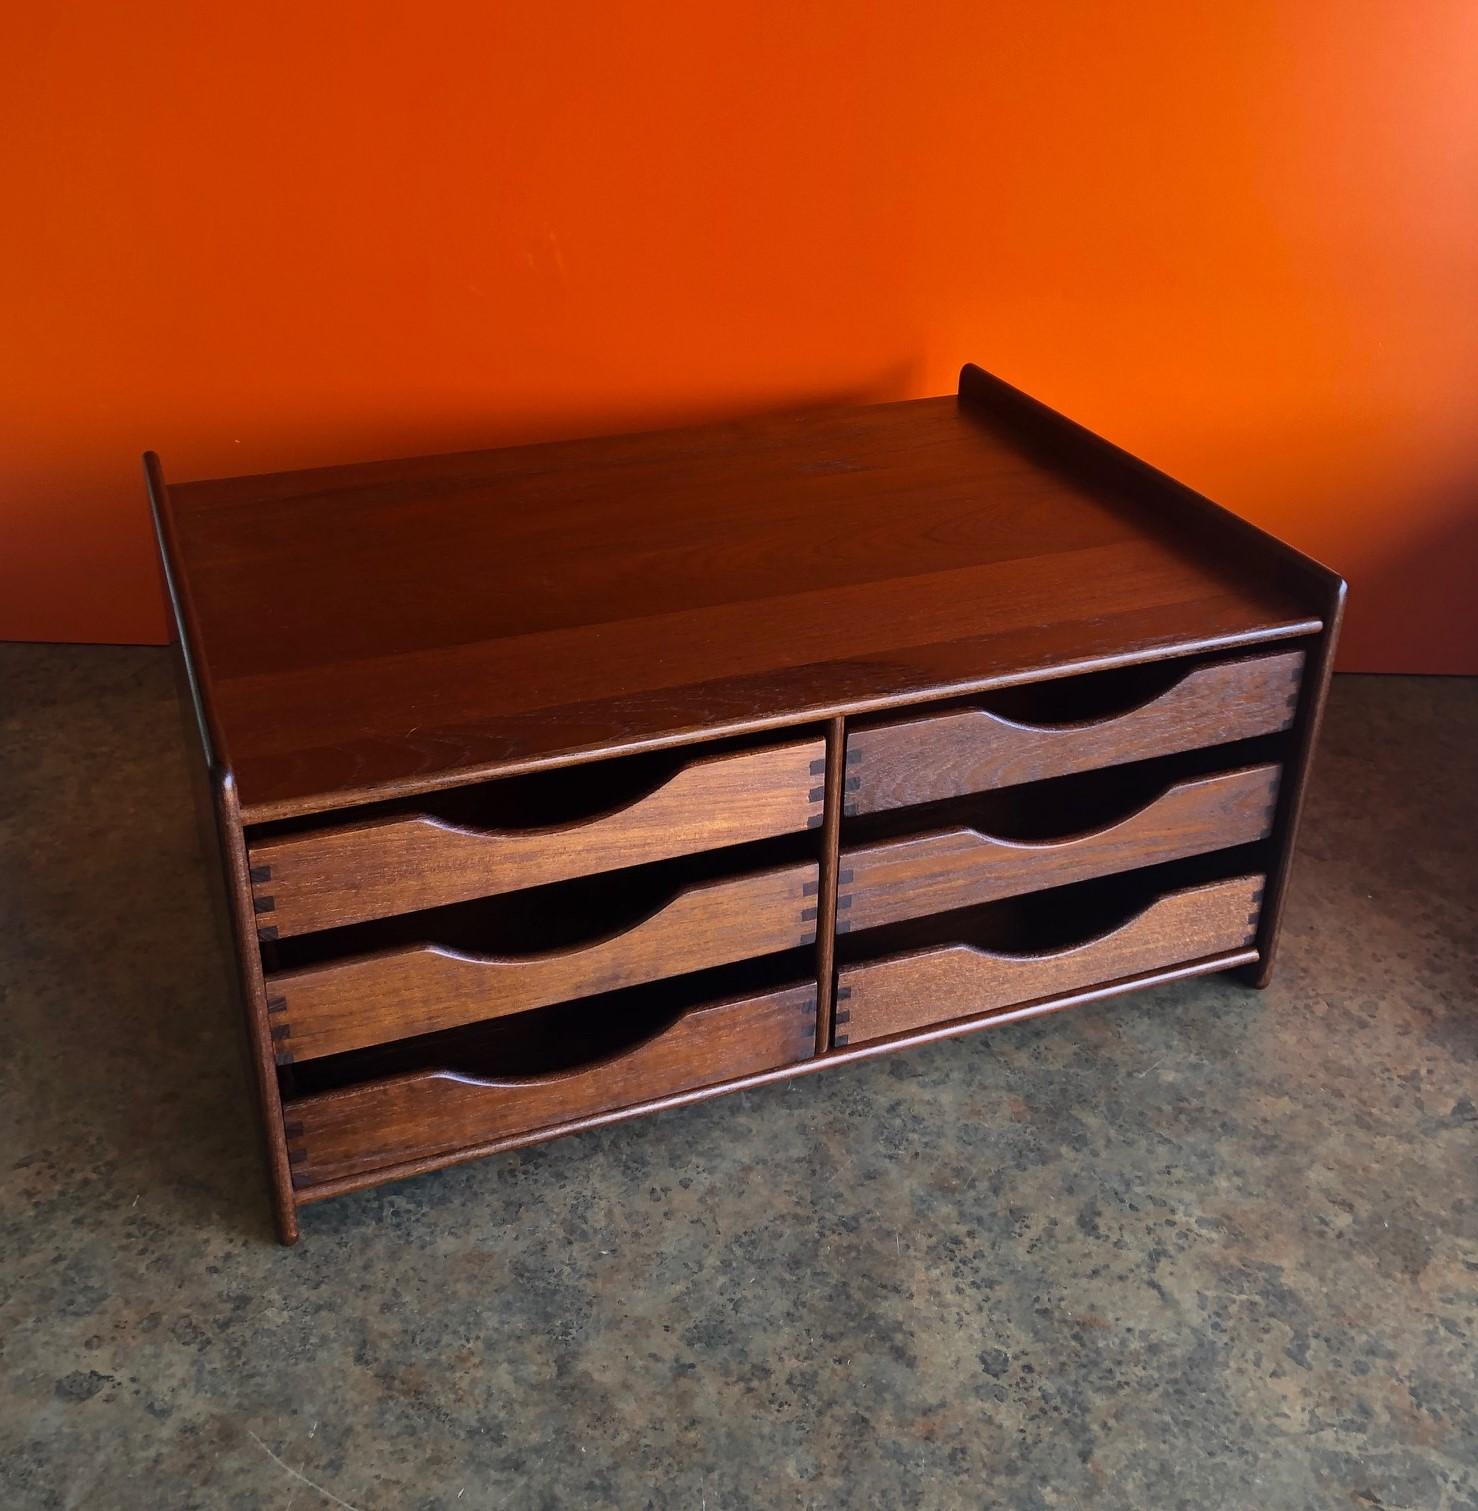 Very functional Danish modern teak desk organizer / 6-drawer letter tray by Nordisk Andels-Eksport, circa 1970s. The piece has 6 dovetailed letter drawers that can be removed from either side of the base and is in excellent condition. Very high